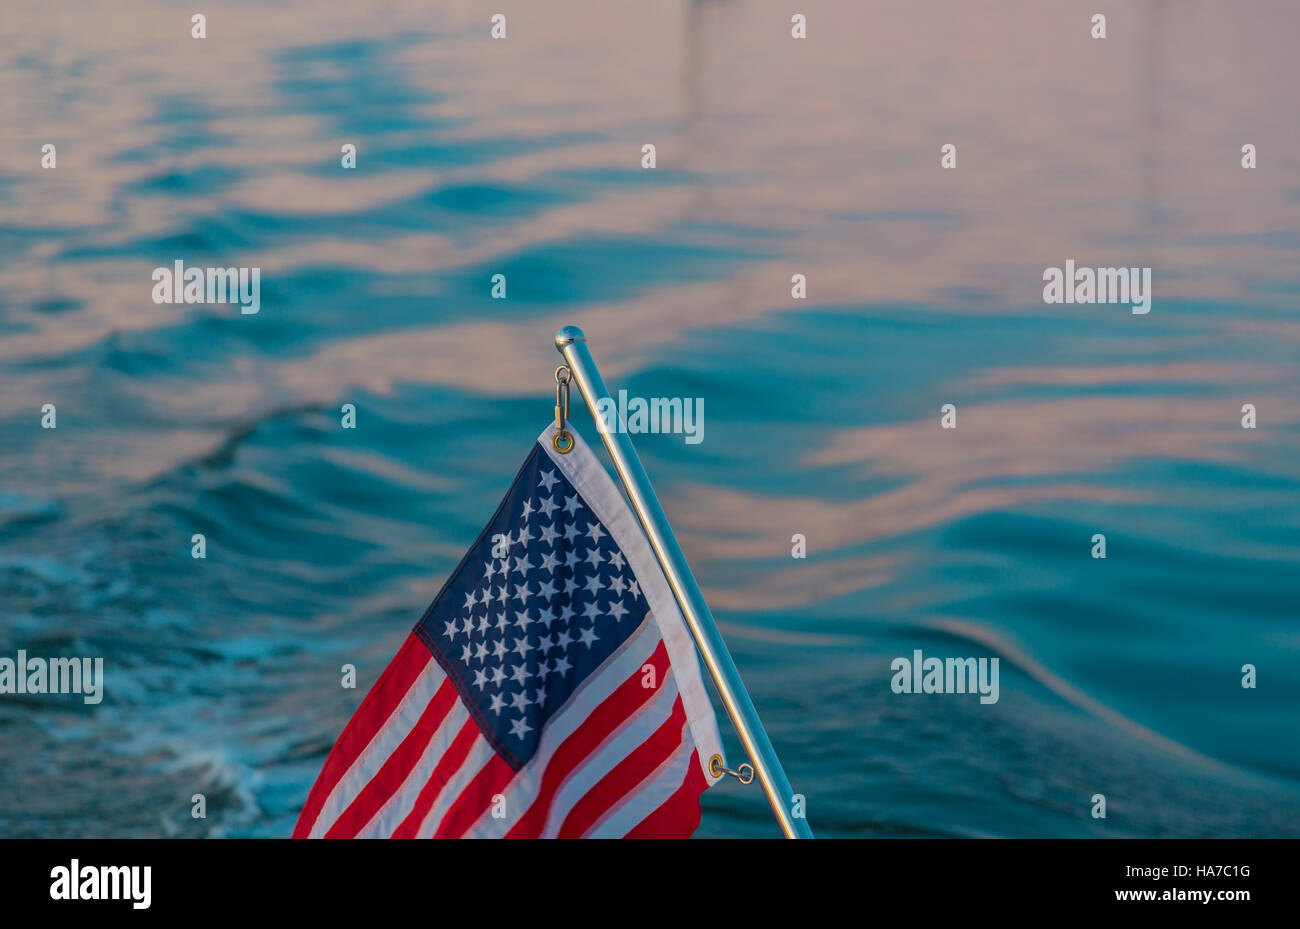 detail image of an American flag on a stainless steel pole with salt water in background Stock Photo